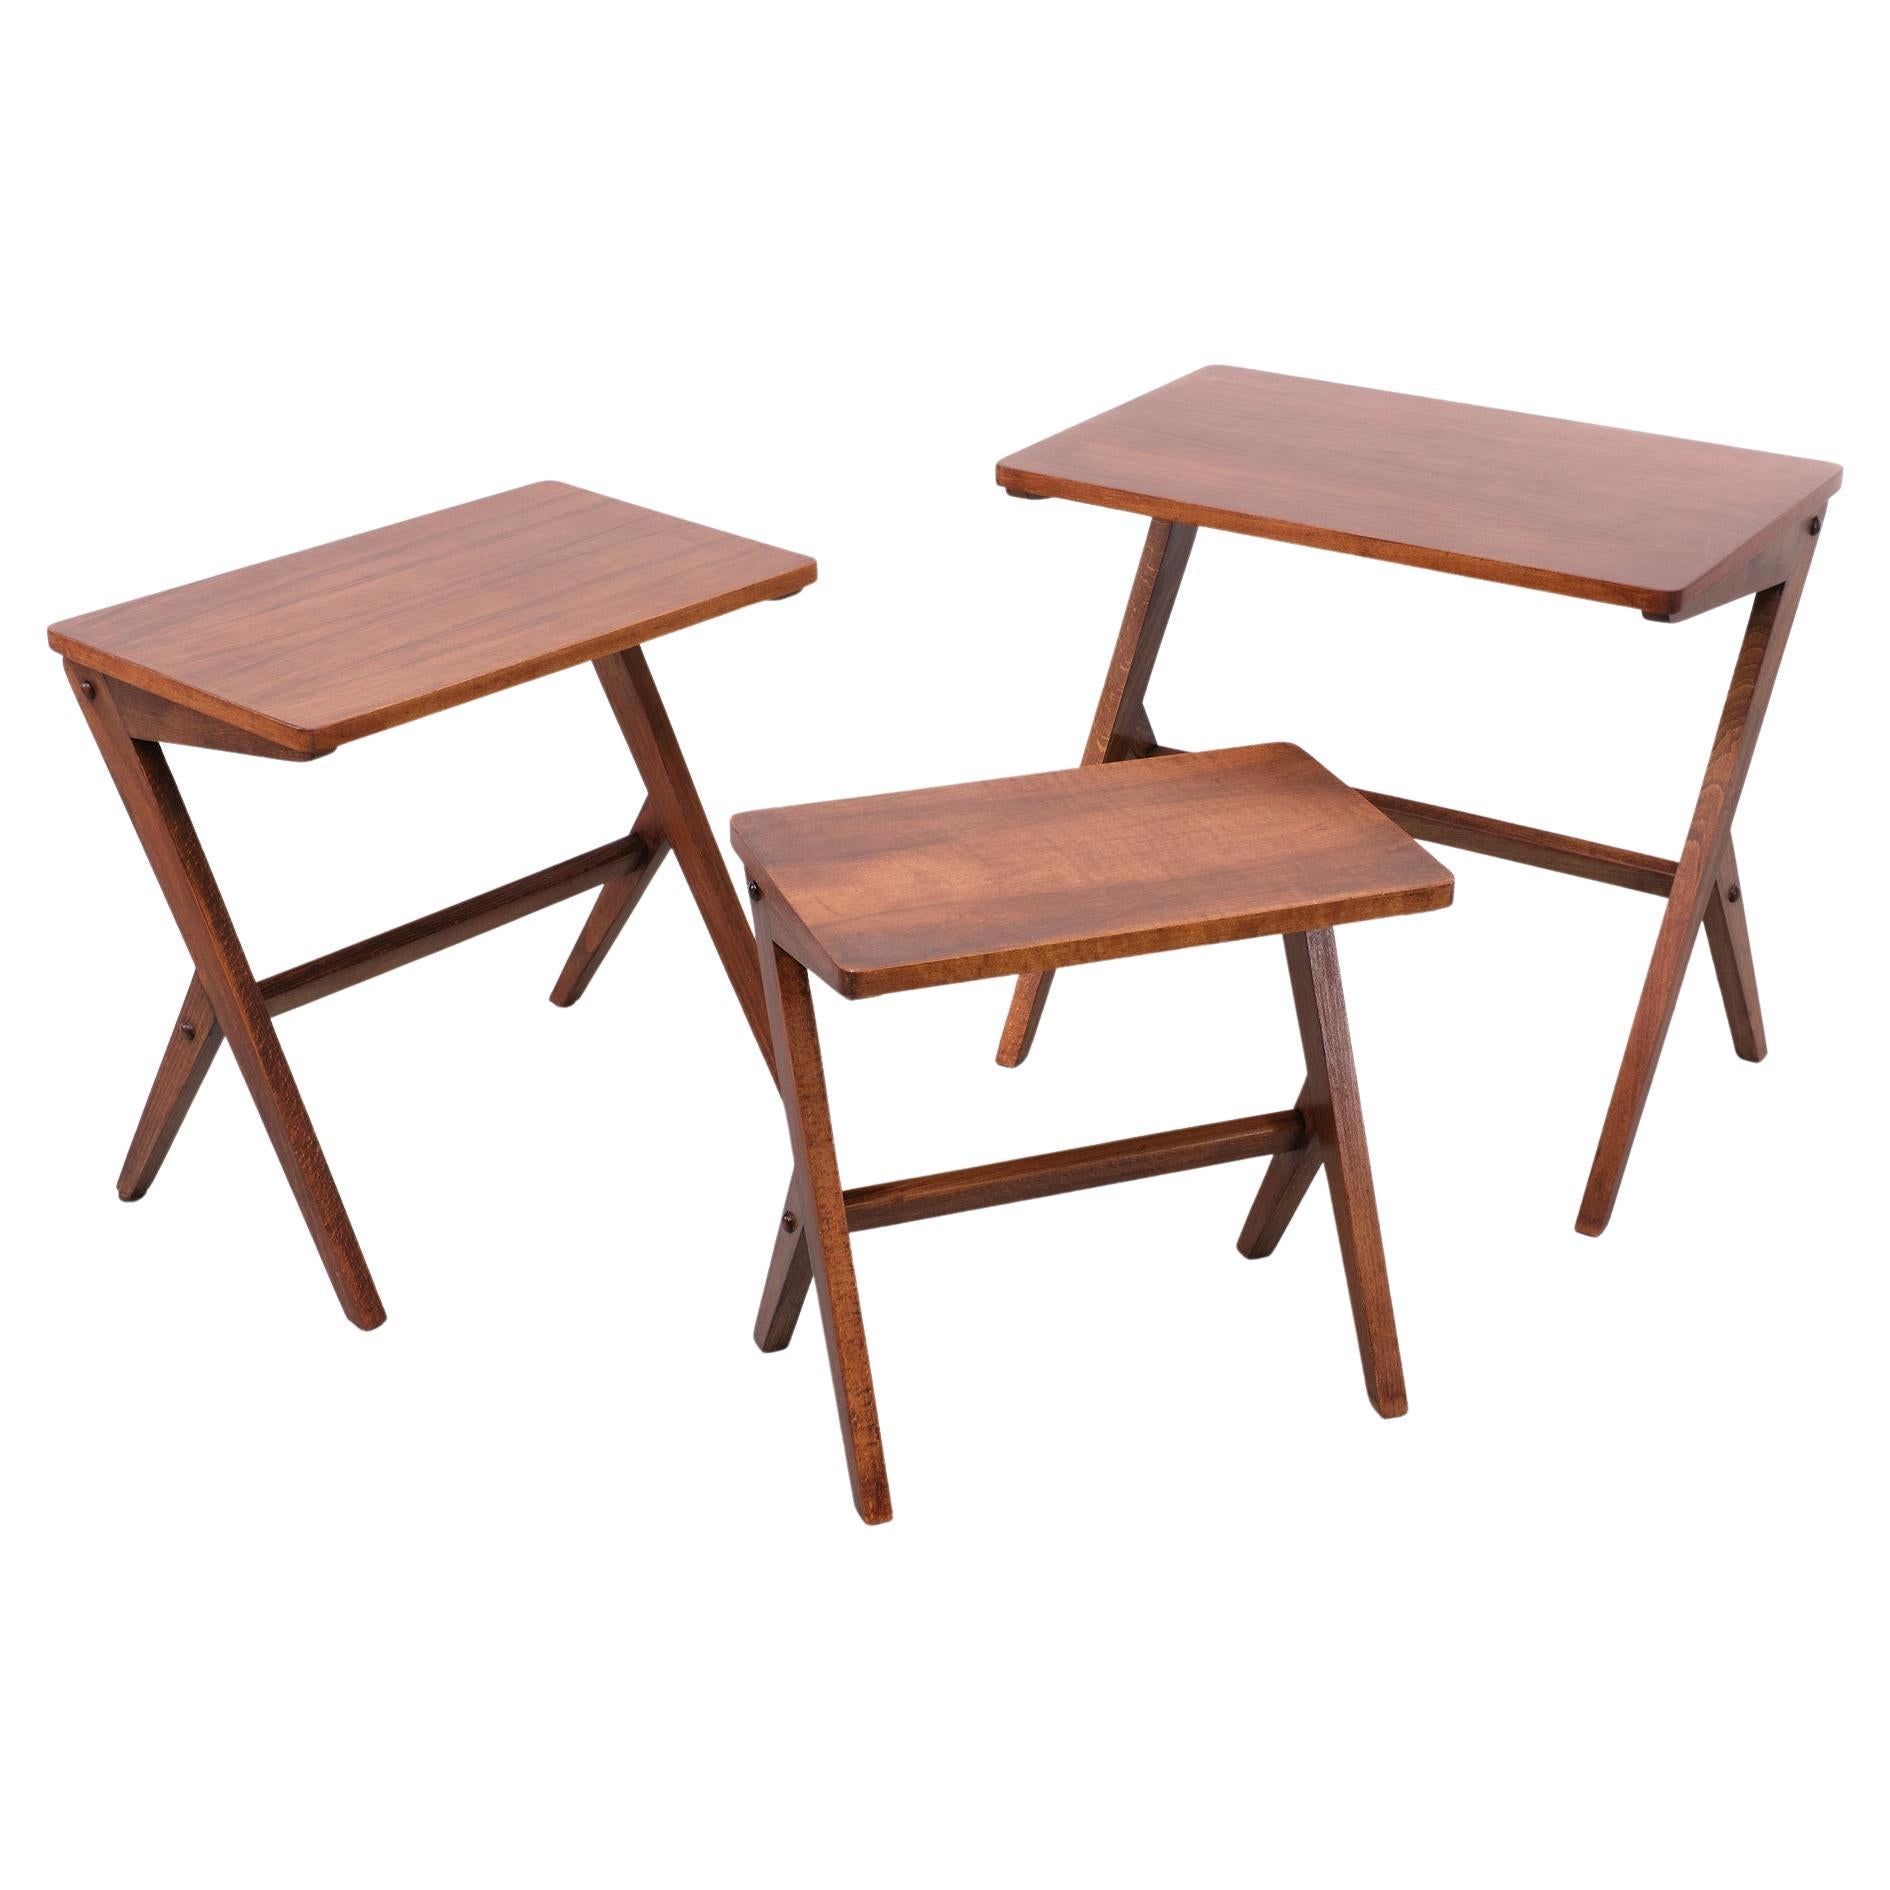  Vintage Nesting Tables in Walnut by Bengt Ruda  Sweden   1950s In Good Condition For Sale In Den Haag, NL